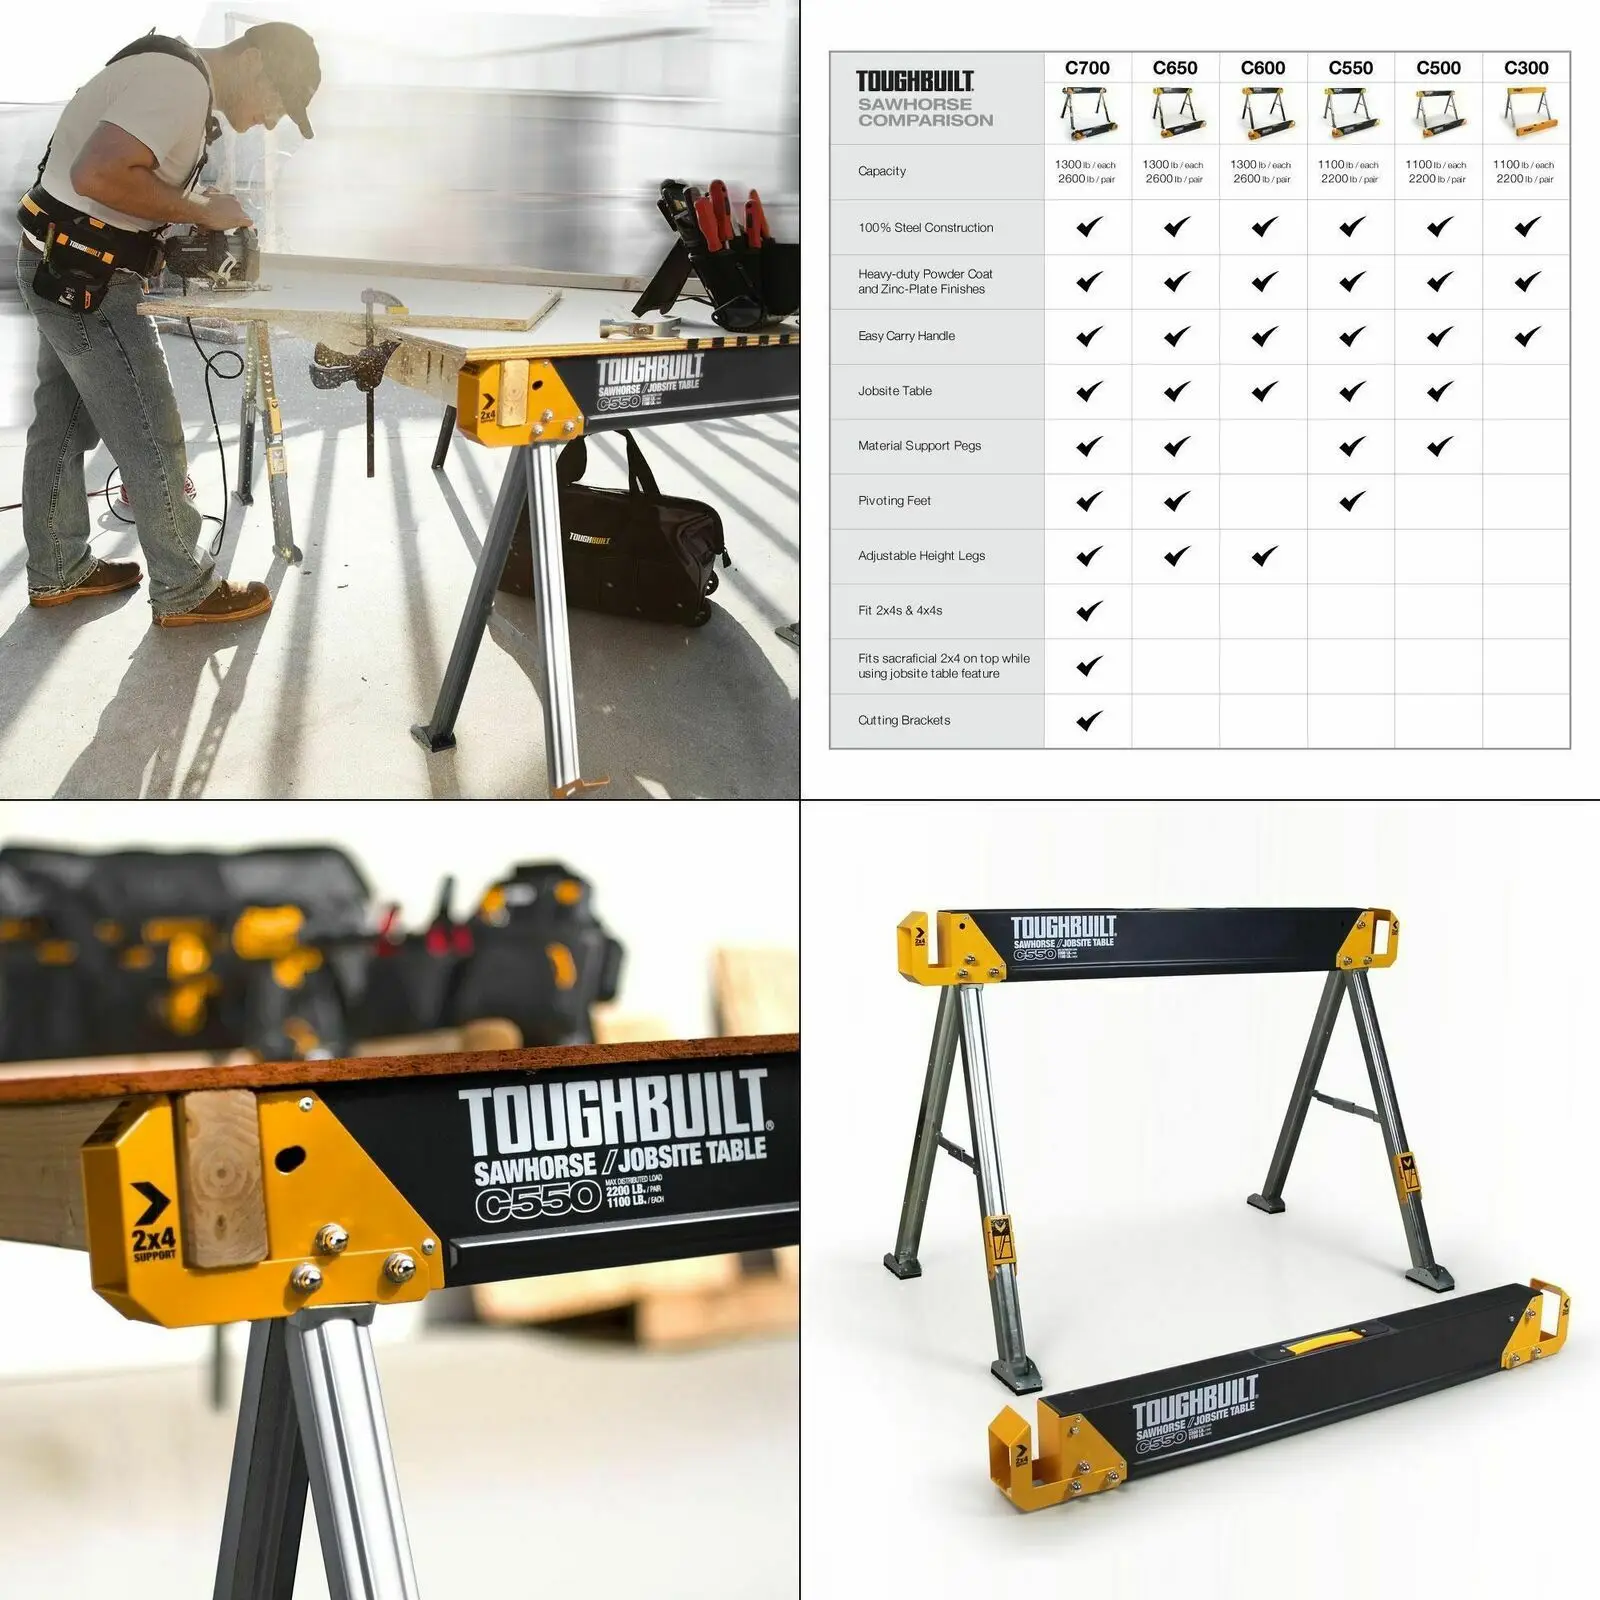 TOUGHBUILT Sawhorse Jobsite Table Adjustable Height Steel Corrosion Resistance for sale online